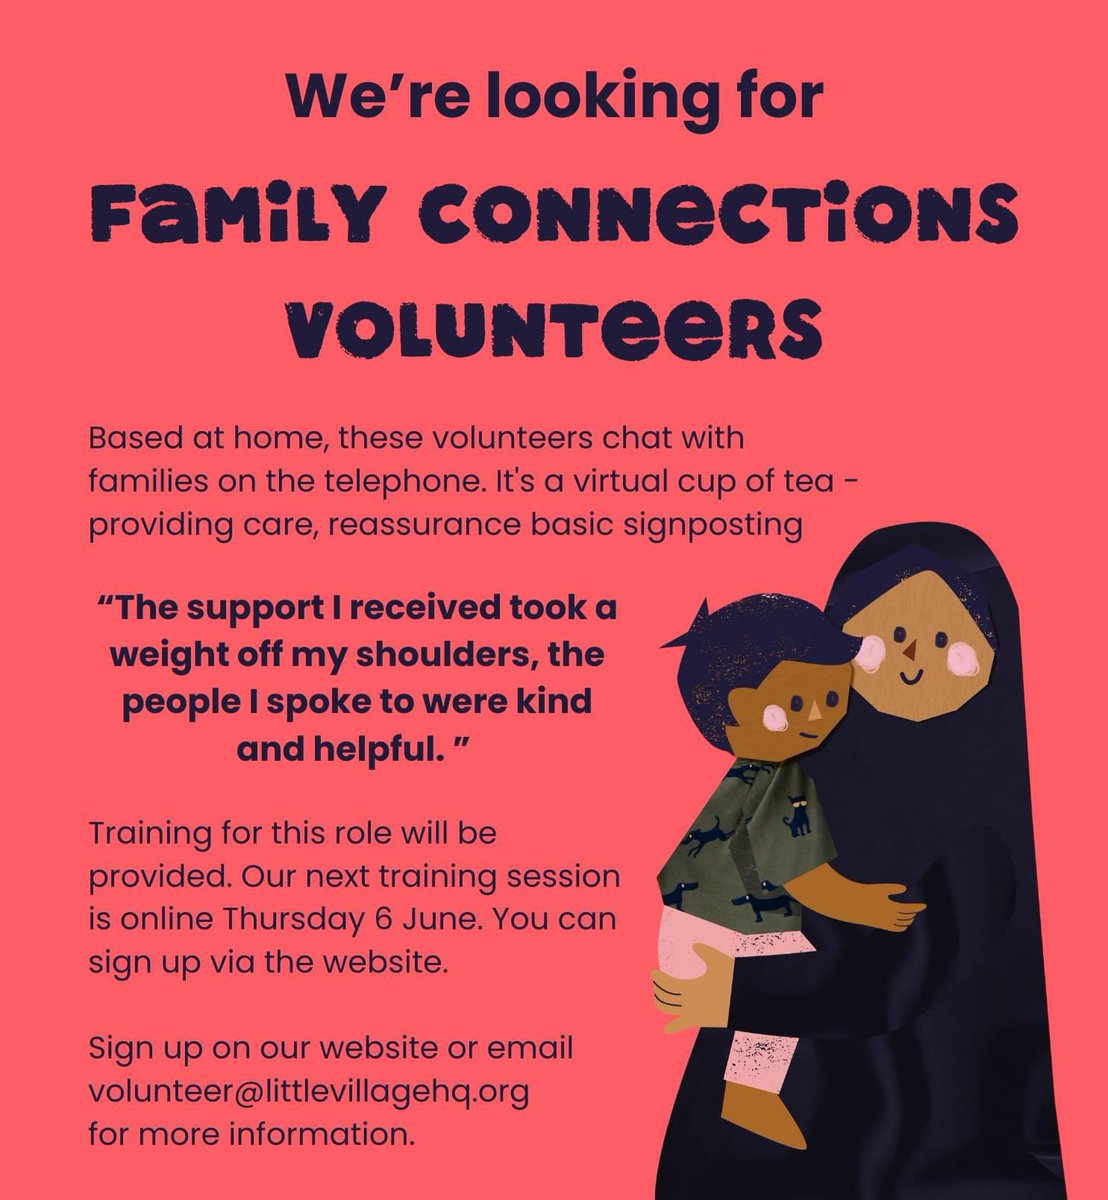 Volunteer Opportunity at Little Village

Join Family Connections volunteers at Little Village and make a real impact while learning new skills! Full training provided.

See flyer for details 👀
#VolunteerOpportunity #CommunityImpact #LittleVillage #MakeADifference #LearnAndGrow